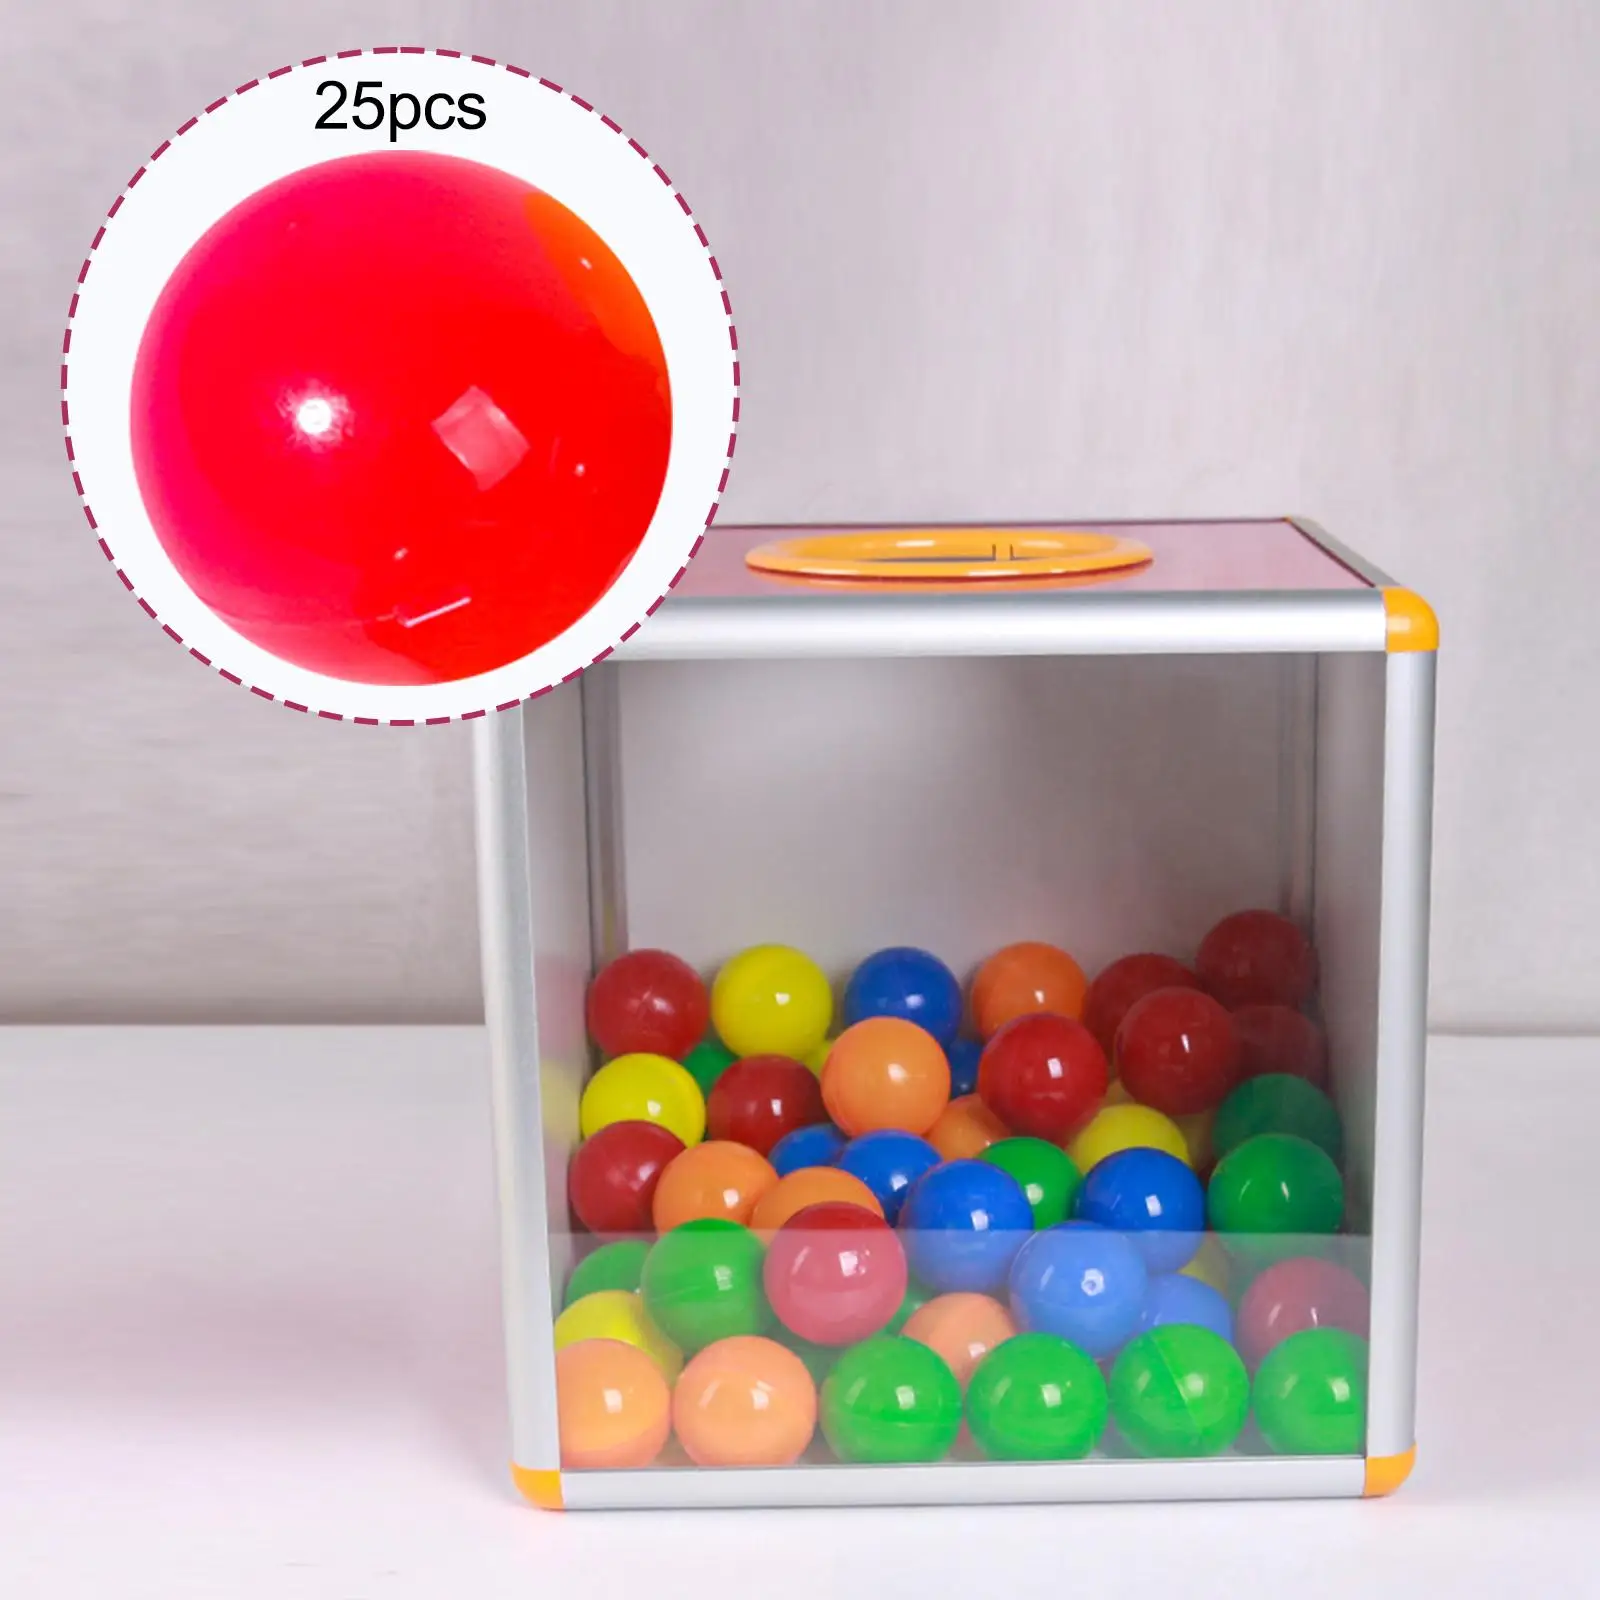 25 Pieces Bingo Ball Durable Equipment Universal Replacement Parts Tally Ball Raffle Balls for Parties Office Nights Family Home